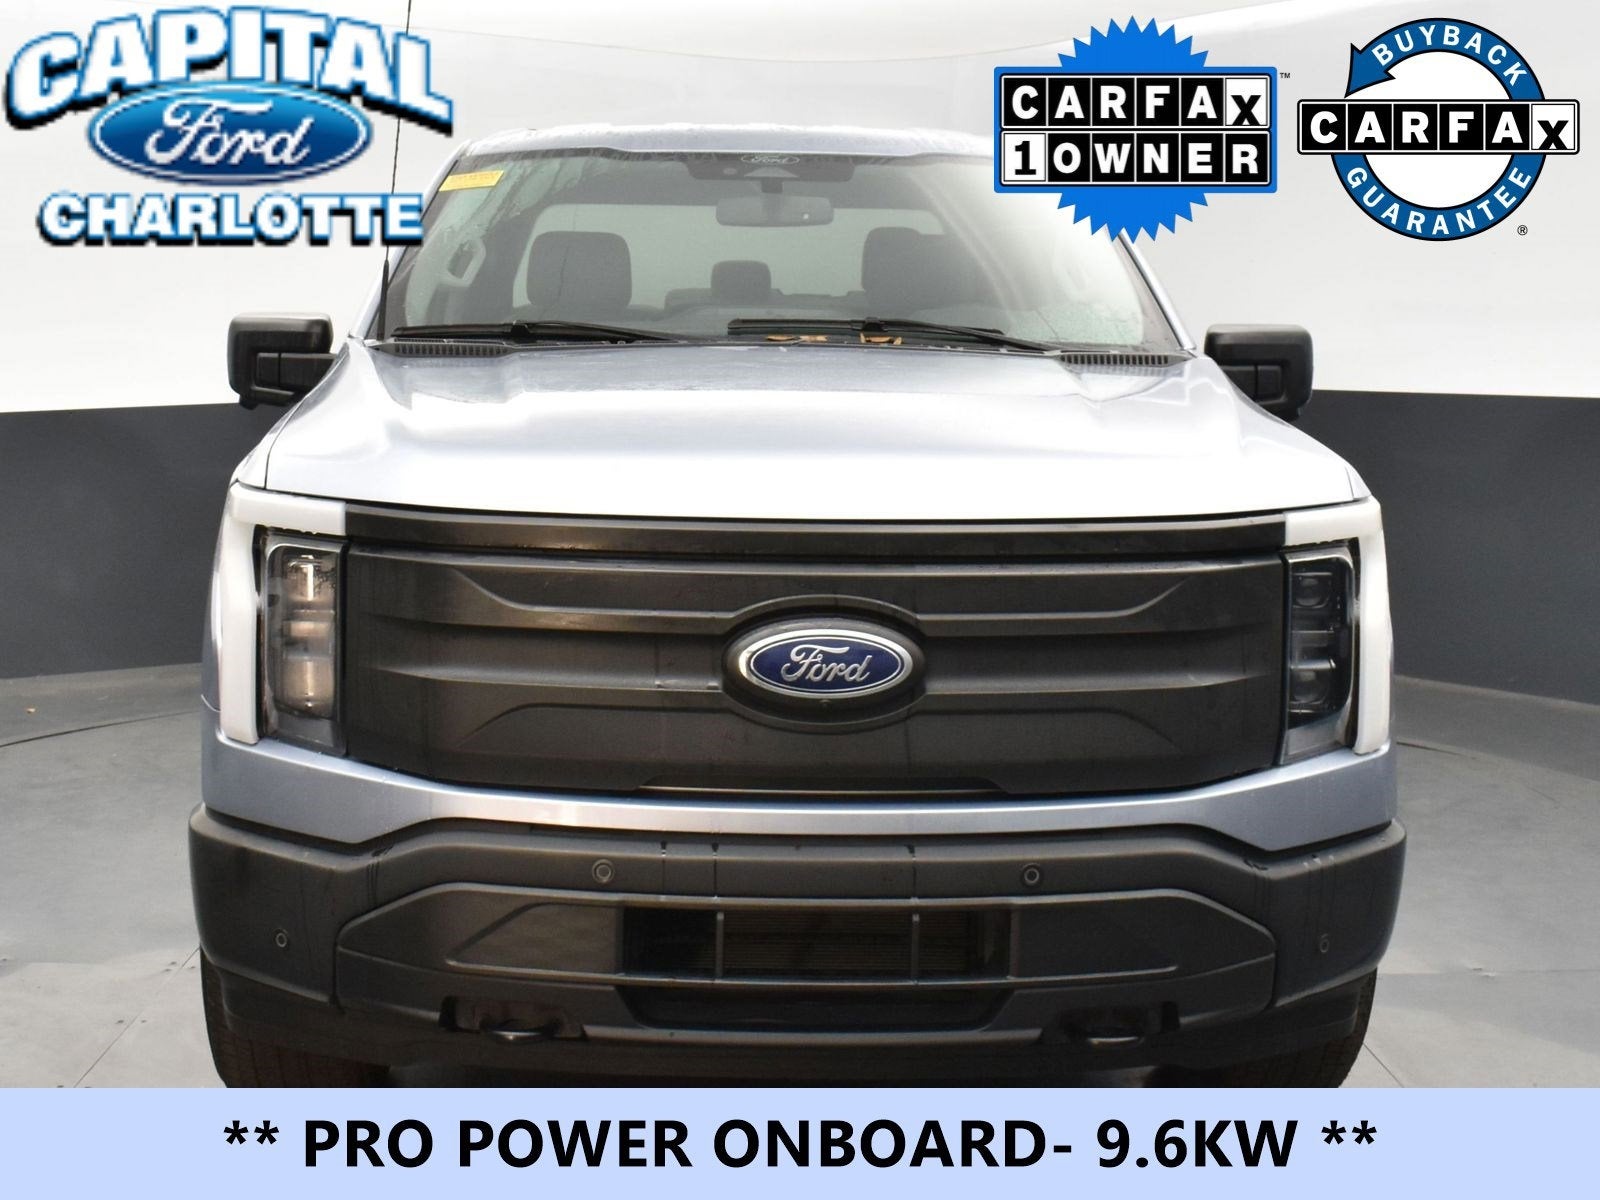 Used 2022 Ford F-150 Lightning Pro with VIN 1FTVW1EL6NWG00006 for sale in Charlotte, NC